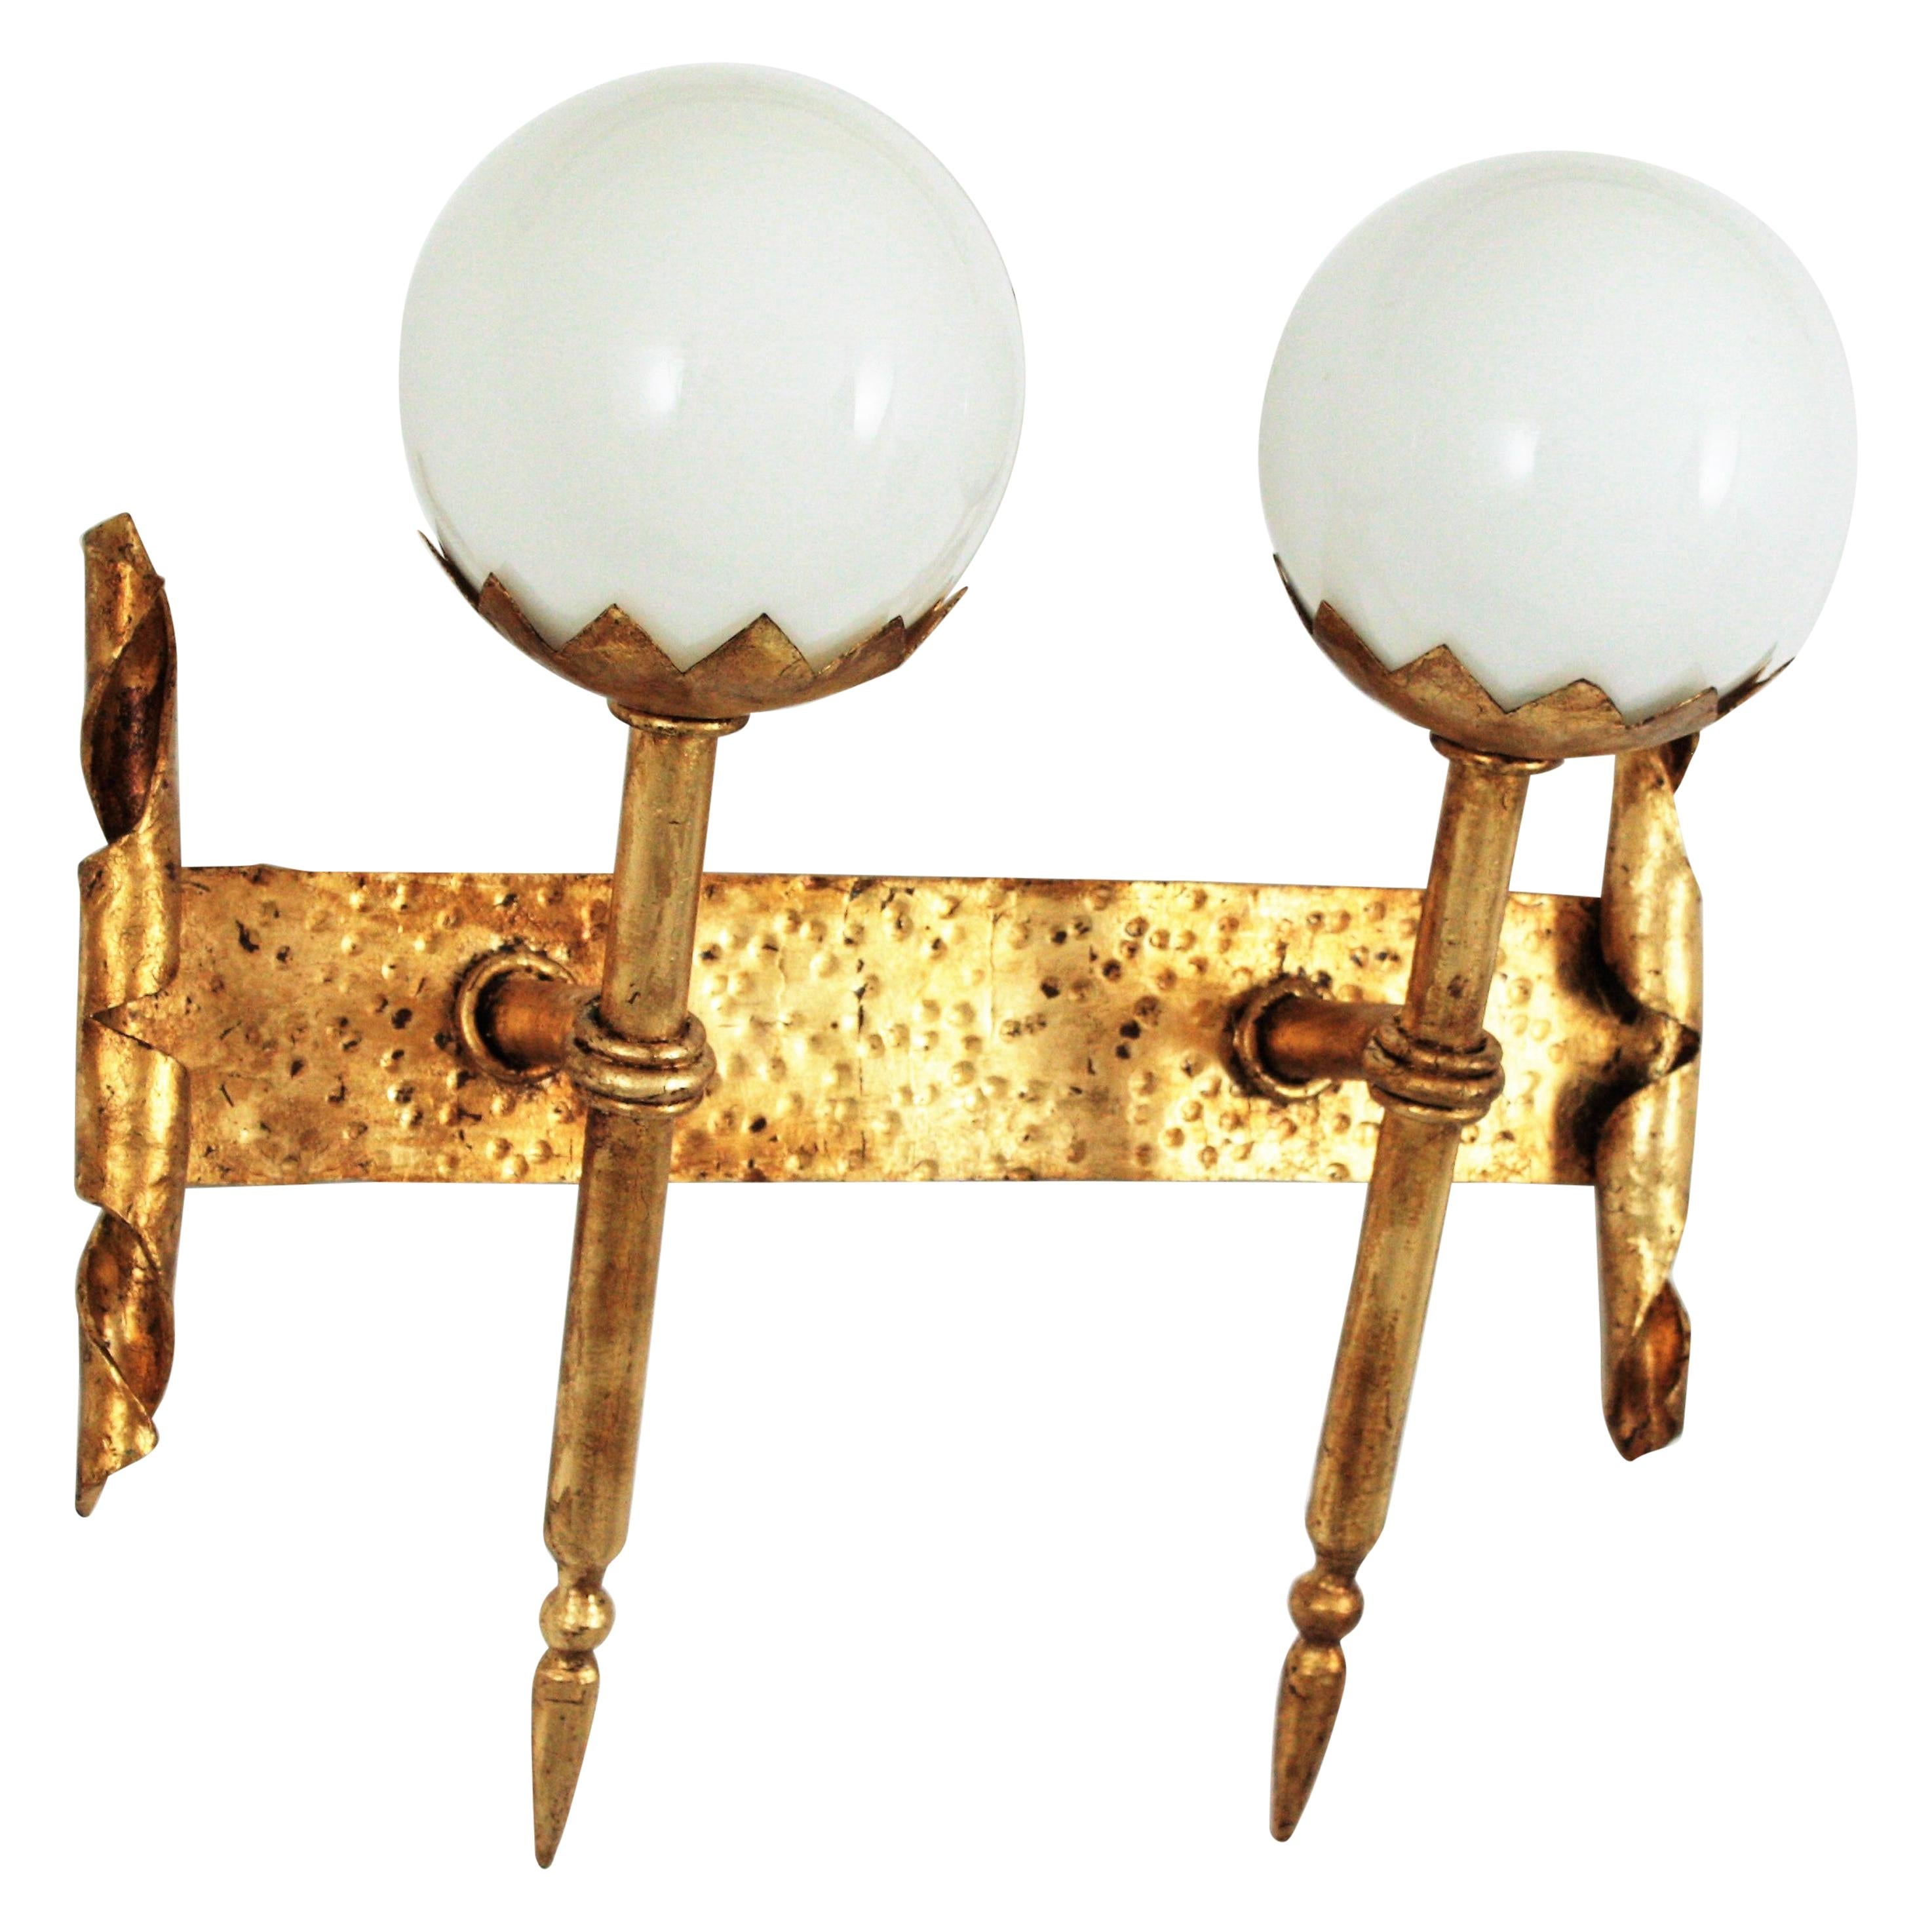 Gothic Revival Double Torch Wall Sconce in Wrought Iron with Milk Glass Globes For Sale